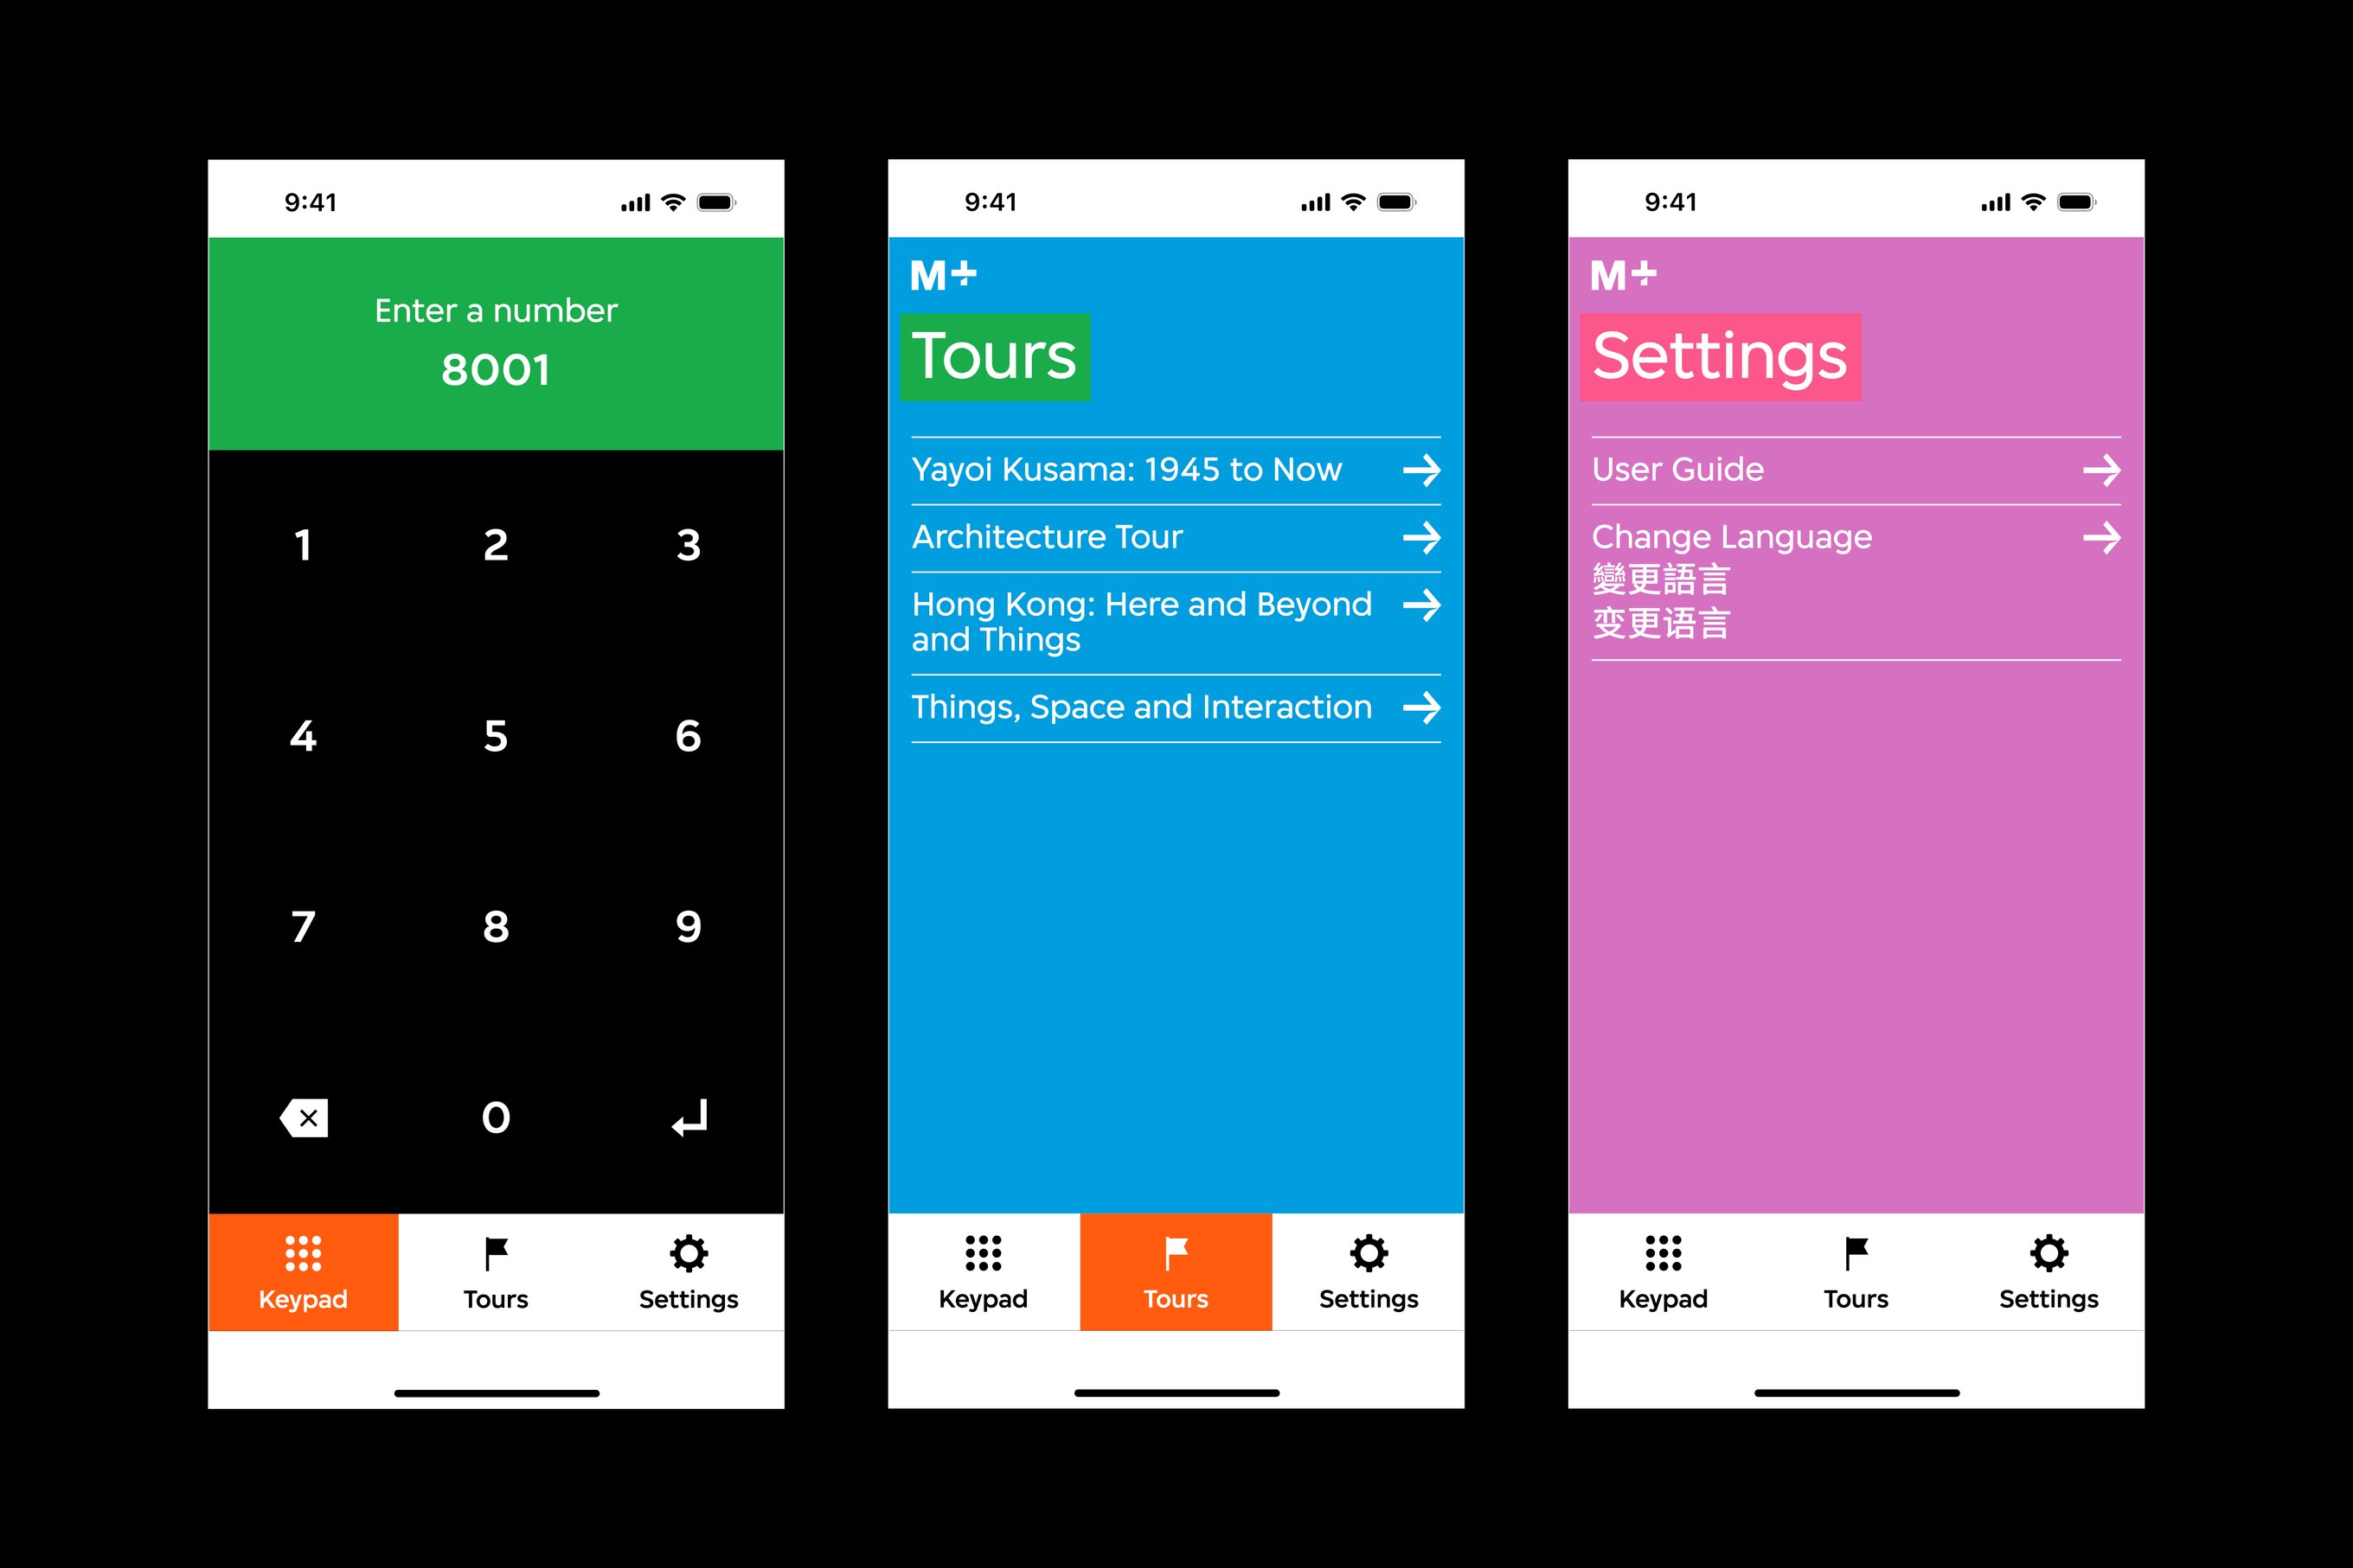 There are three audio guide interfaces. The first interface features the keypad page. The second interface features the tours overview page, and the third interface features the settings page.